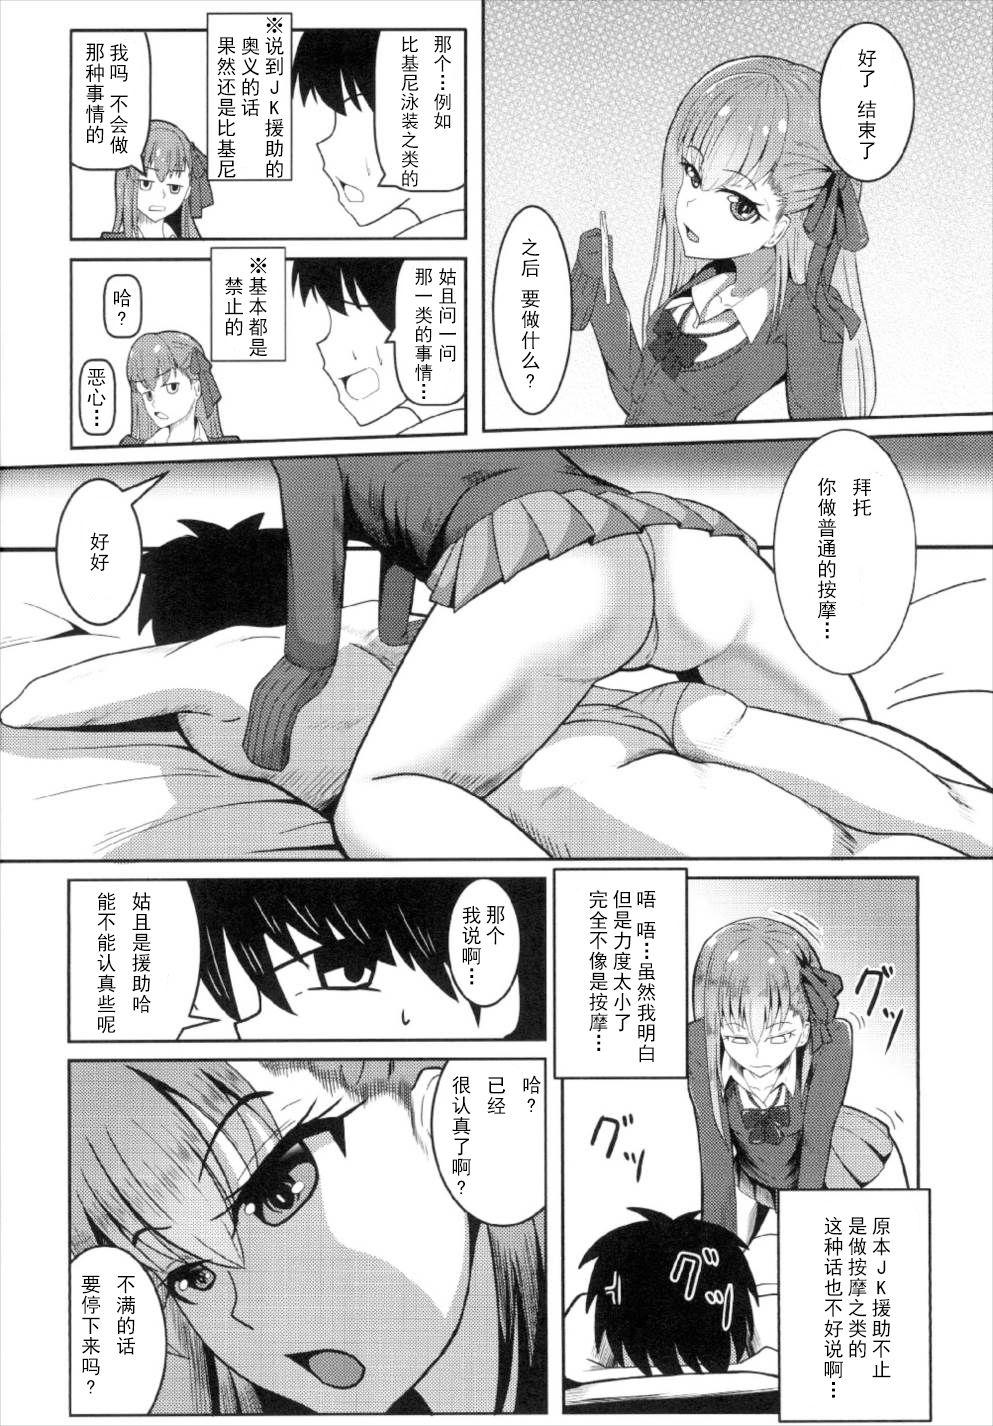 Nasty Free Porn Chaldea JK Collection Vol. 2 Meltlilith - Fate grand order Threesome - Page 5